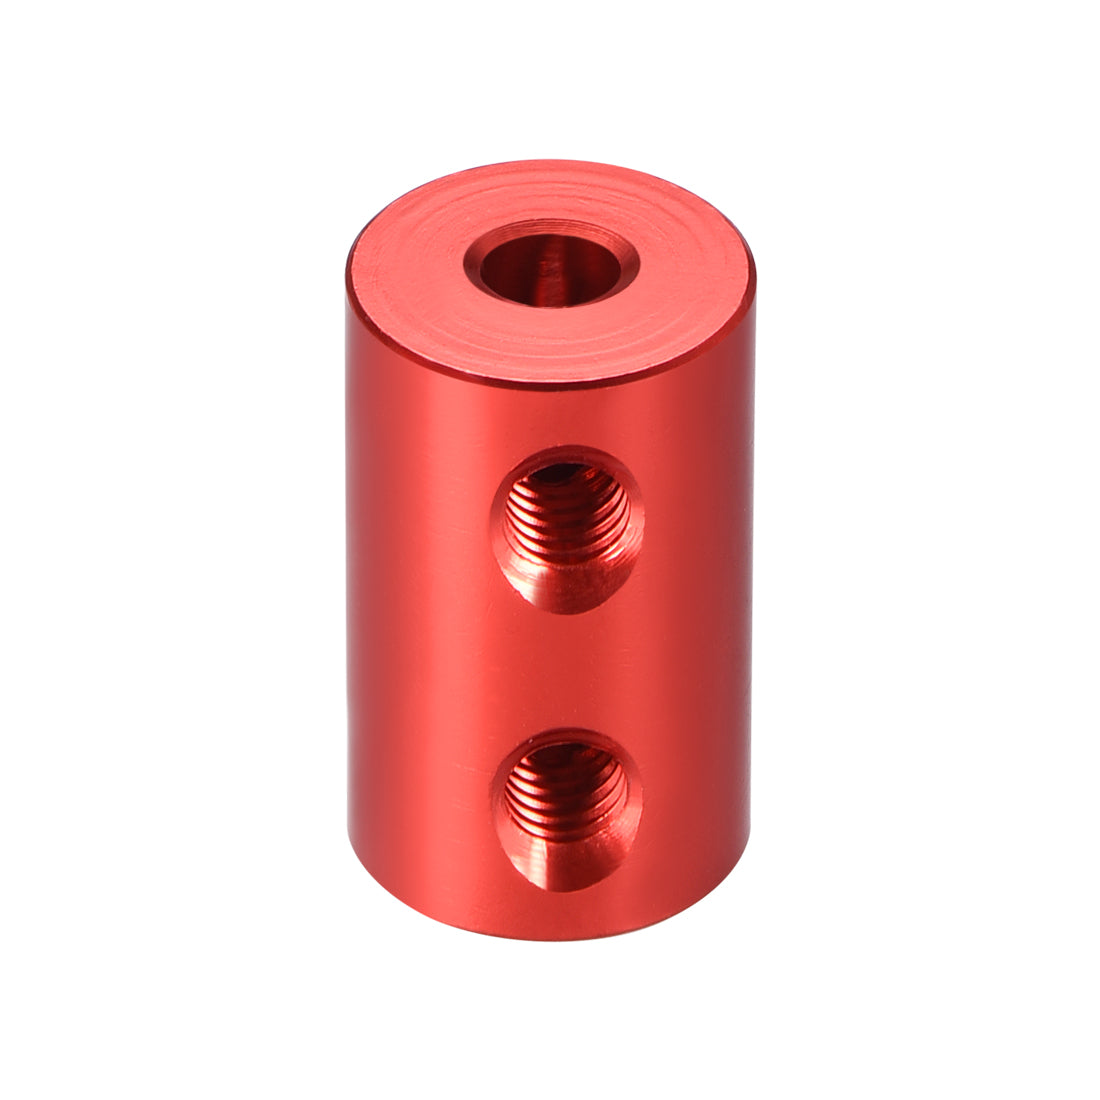 uxcell Uxcell Shaft Coupling 4mm to 6mm Bore L20xD12 Robot Motor Wheel Rigid Coupler Connector Red